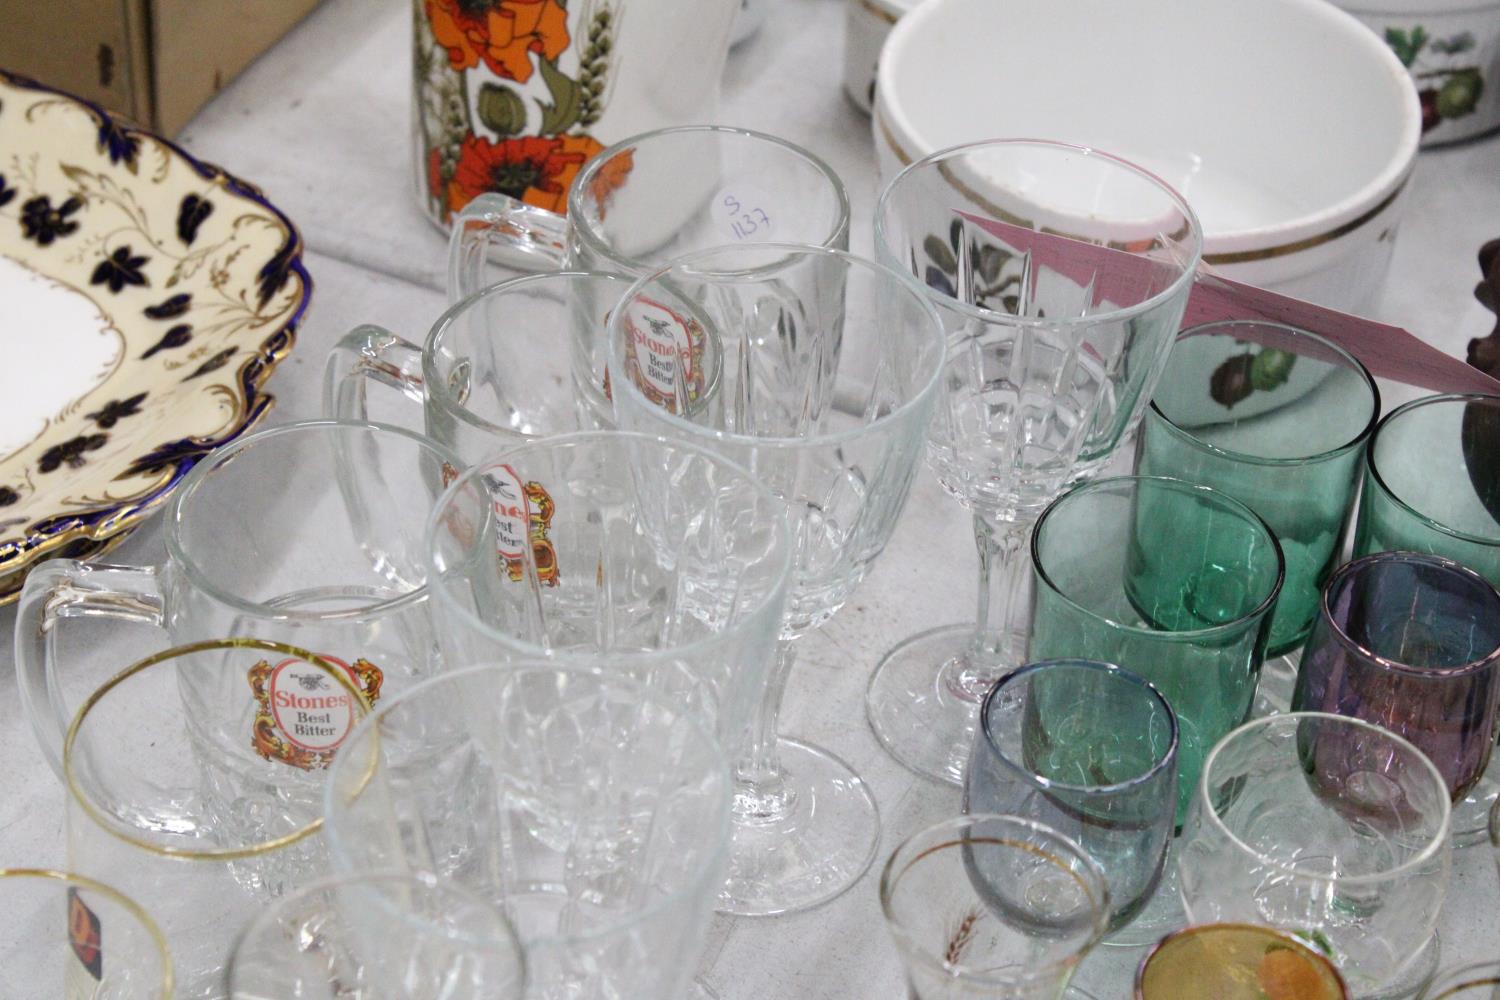 A QUANTITY OF GLASSWARE TO INCLUDE SHOT GLASSES, BEER GLASSES, WINE GLASSES, SHERRY GLASSES ETC - Image 6 of 6